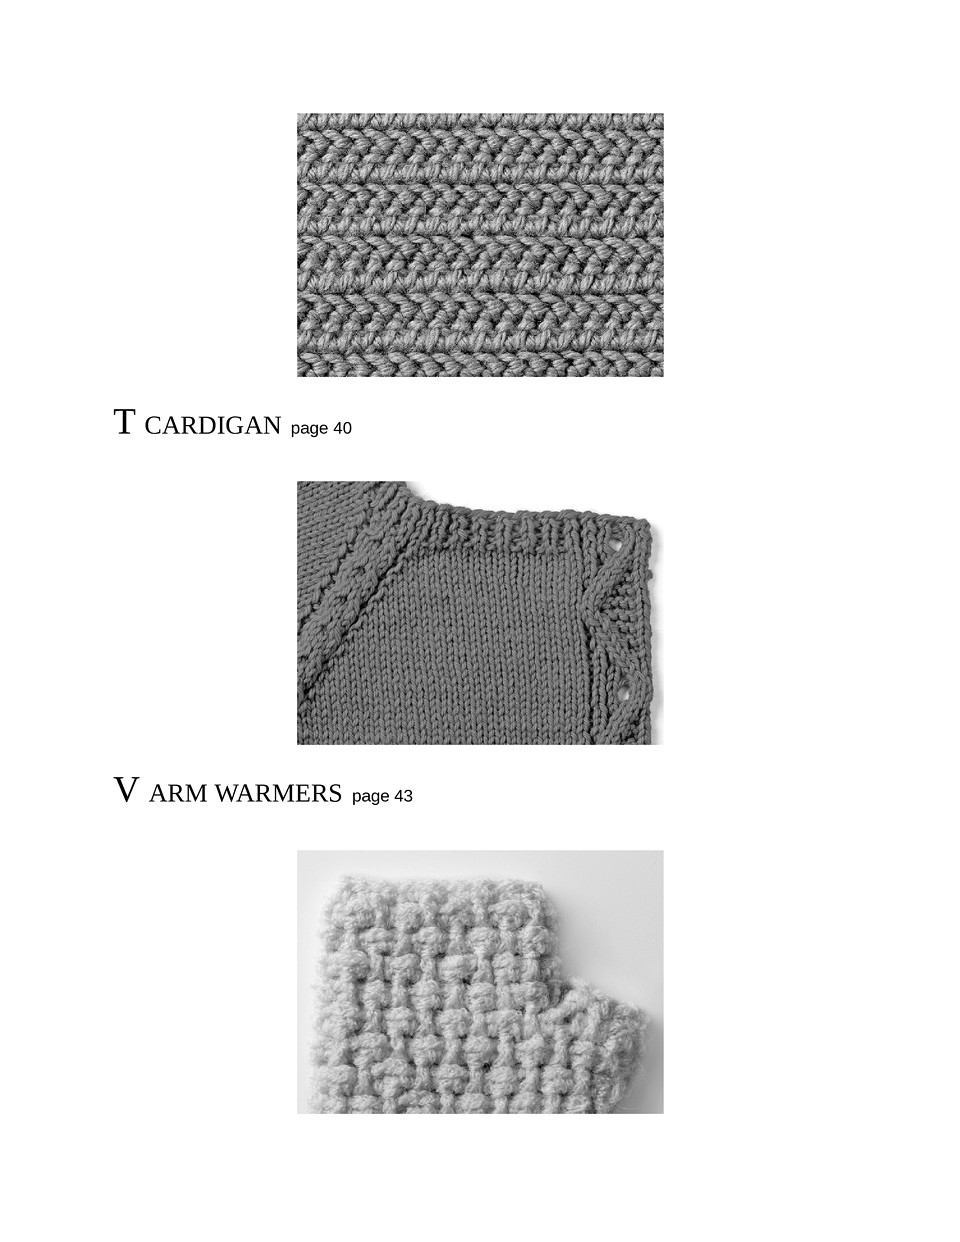 Japanese Knitting Patterns for Sweaters Scarves and More-203